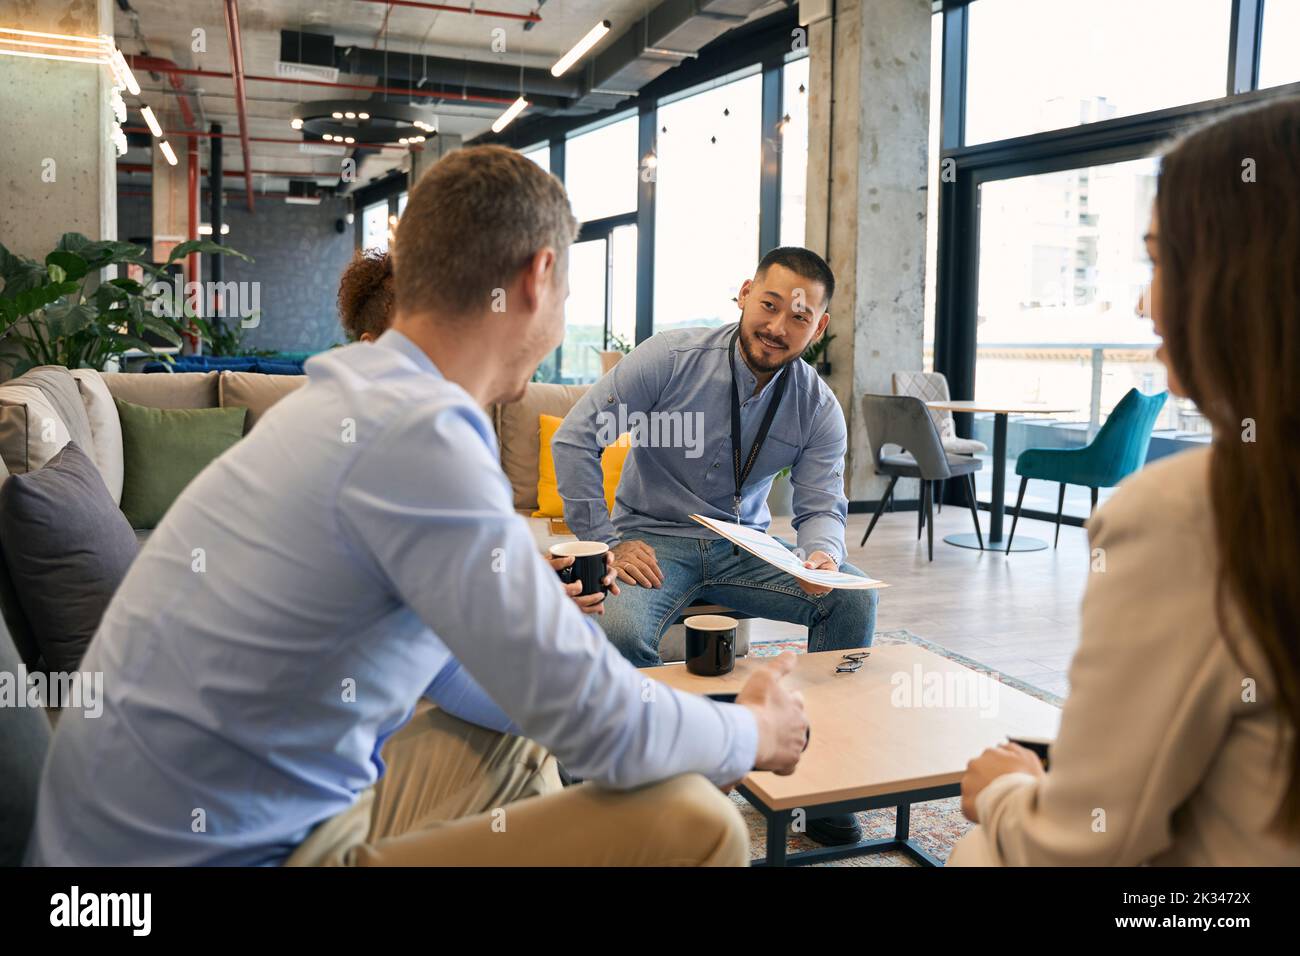 Entrepreneur conducting business meeting with his counterparts Stock Photo